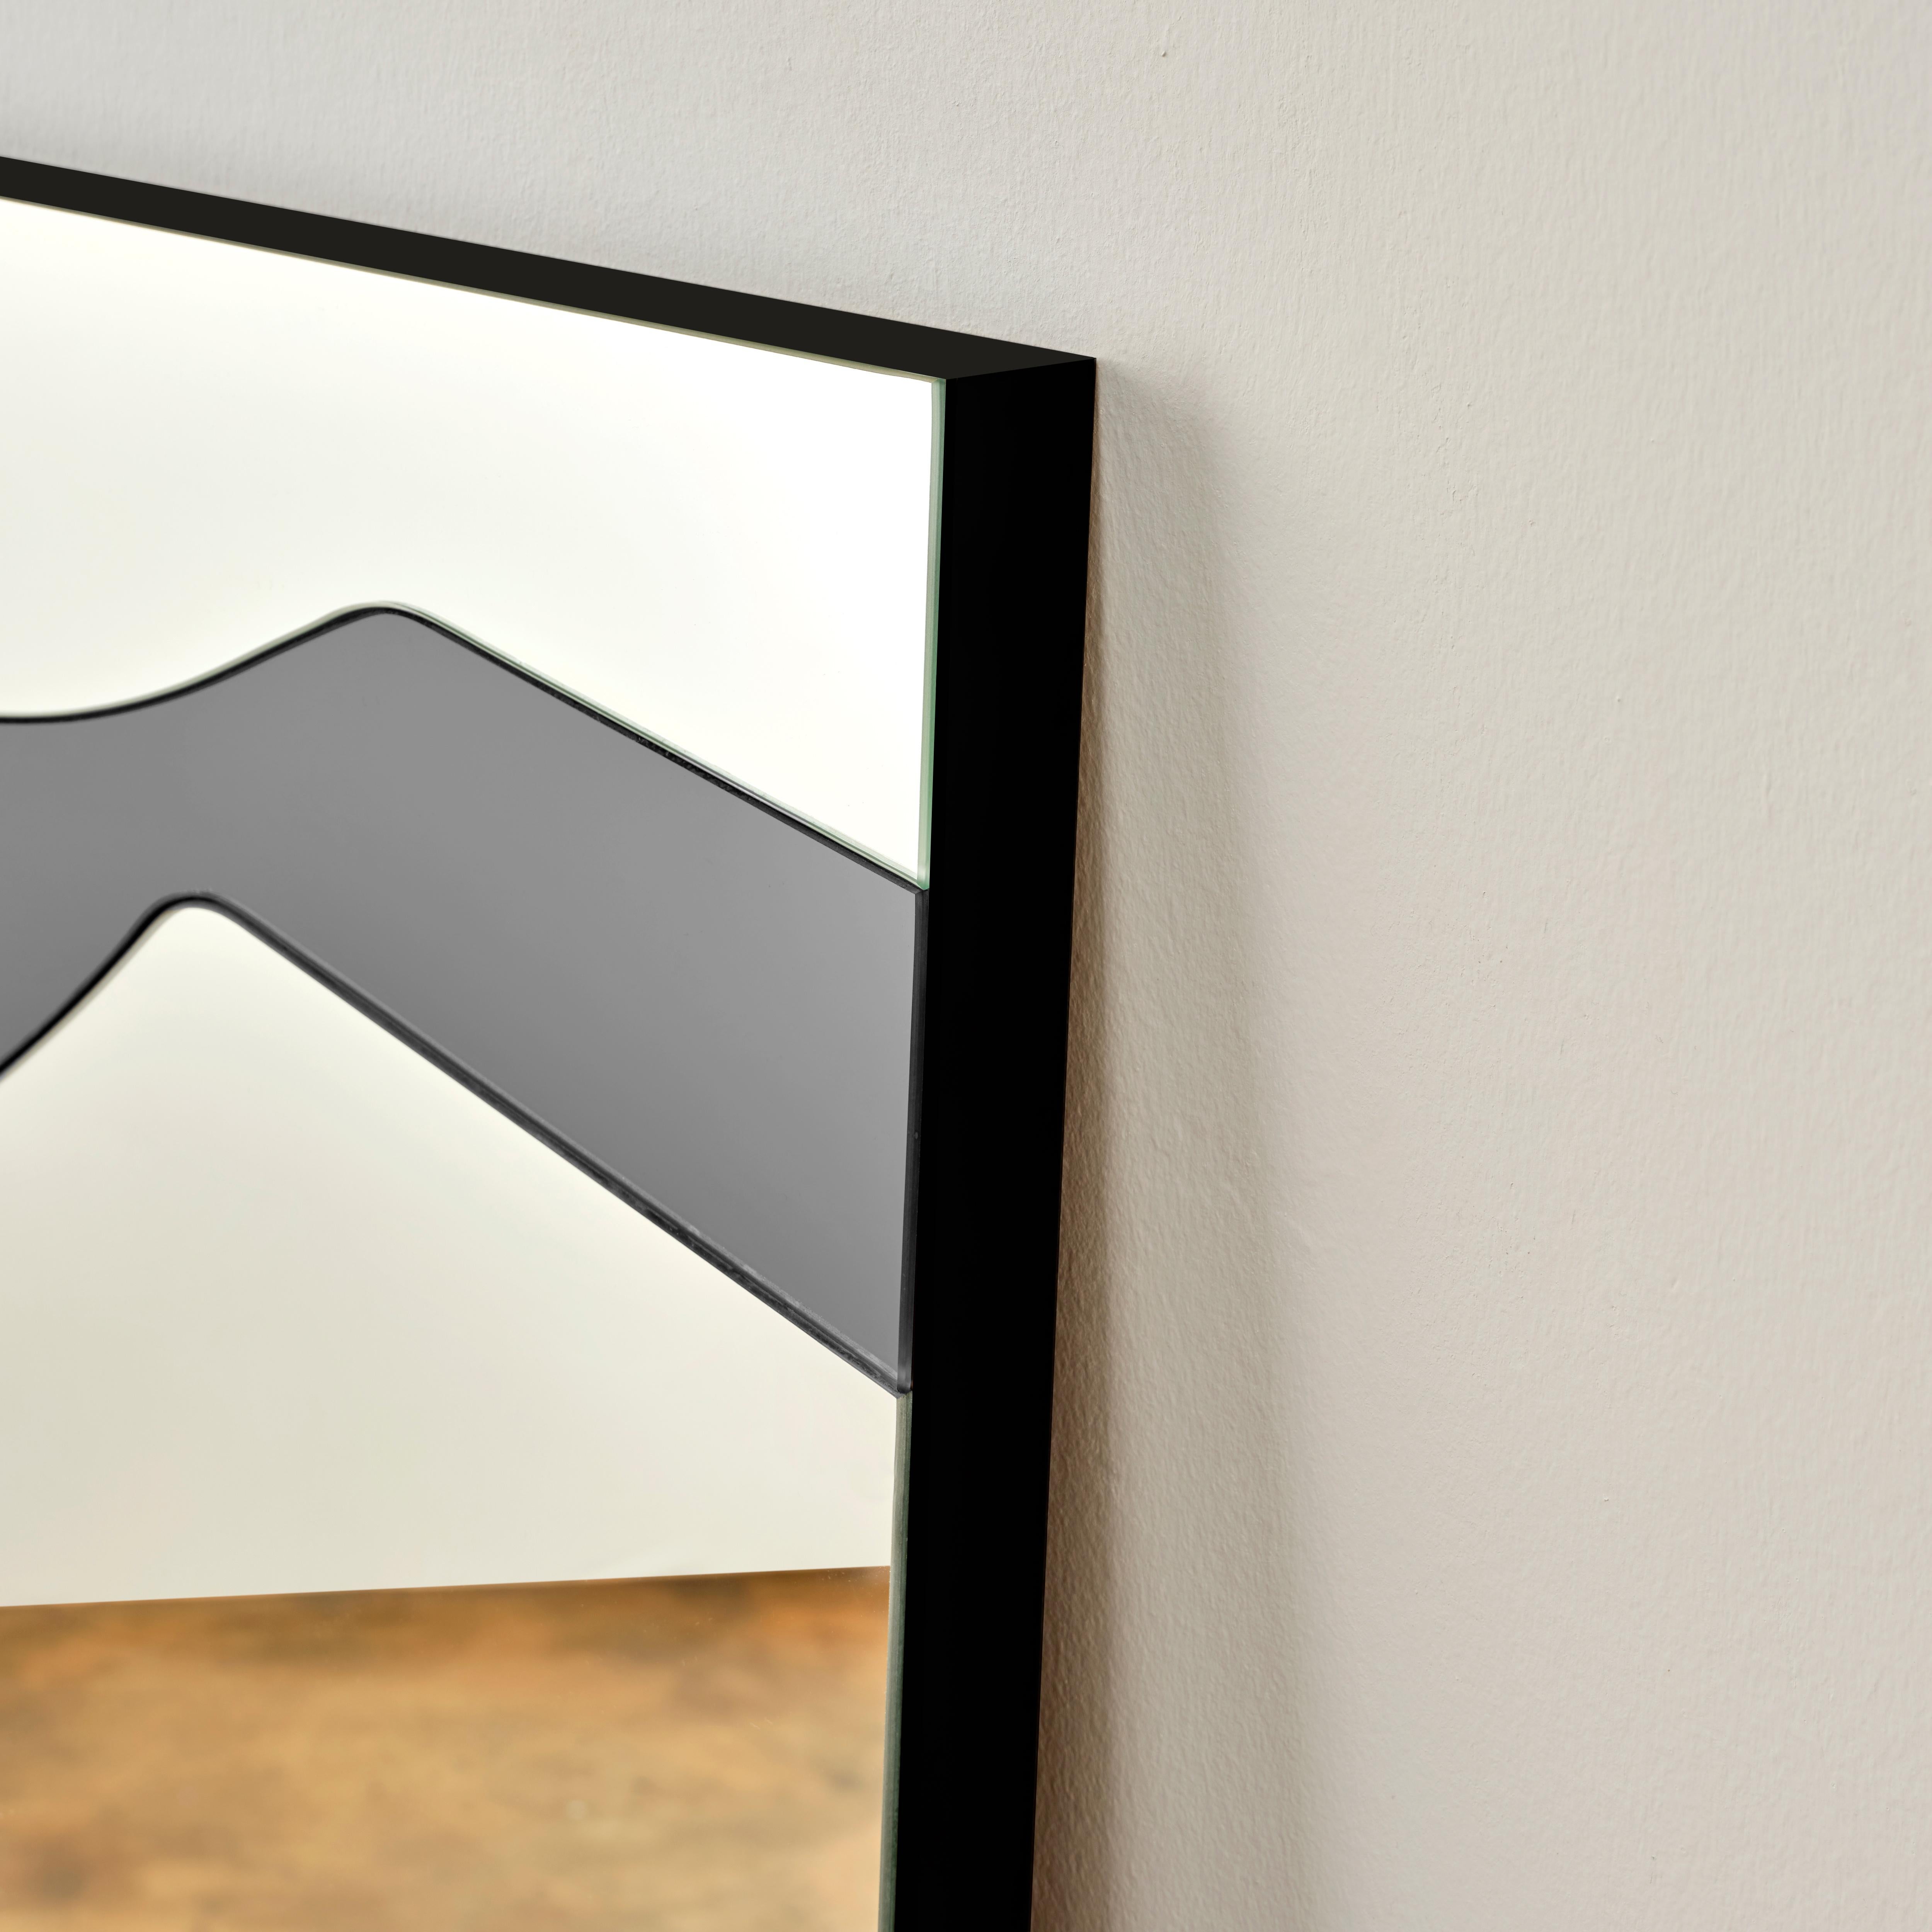 Exposè mirror is made of two large different colored glasses cut into many smaller segments and joint together by hand in order to create a juxtaposed image. Highlighting the line between art and function, this is a unique piece that plays with the